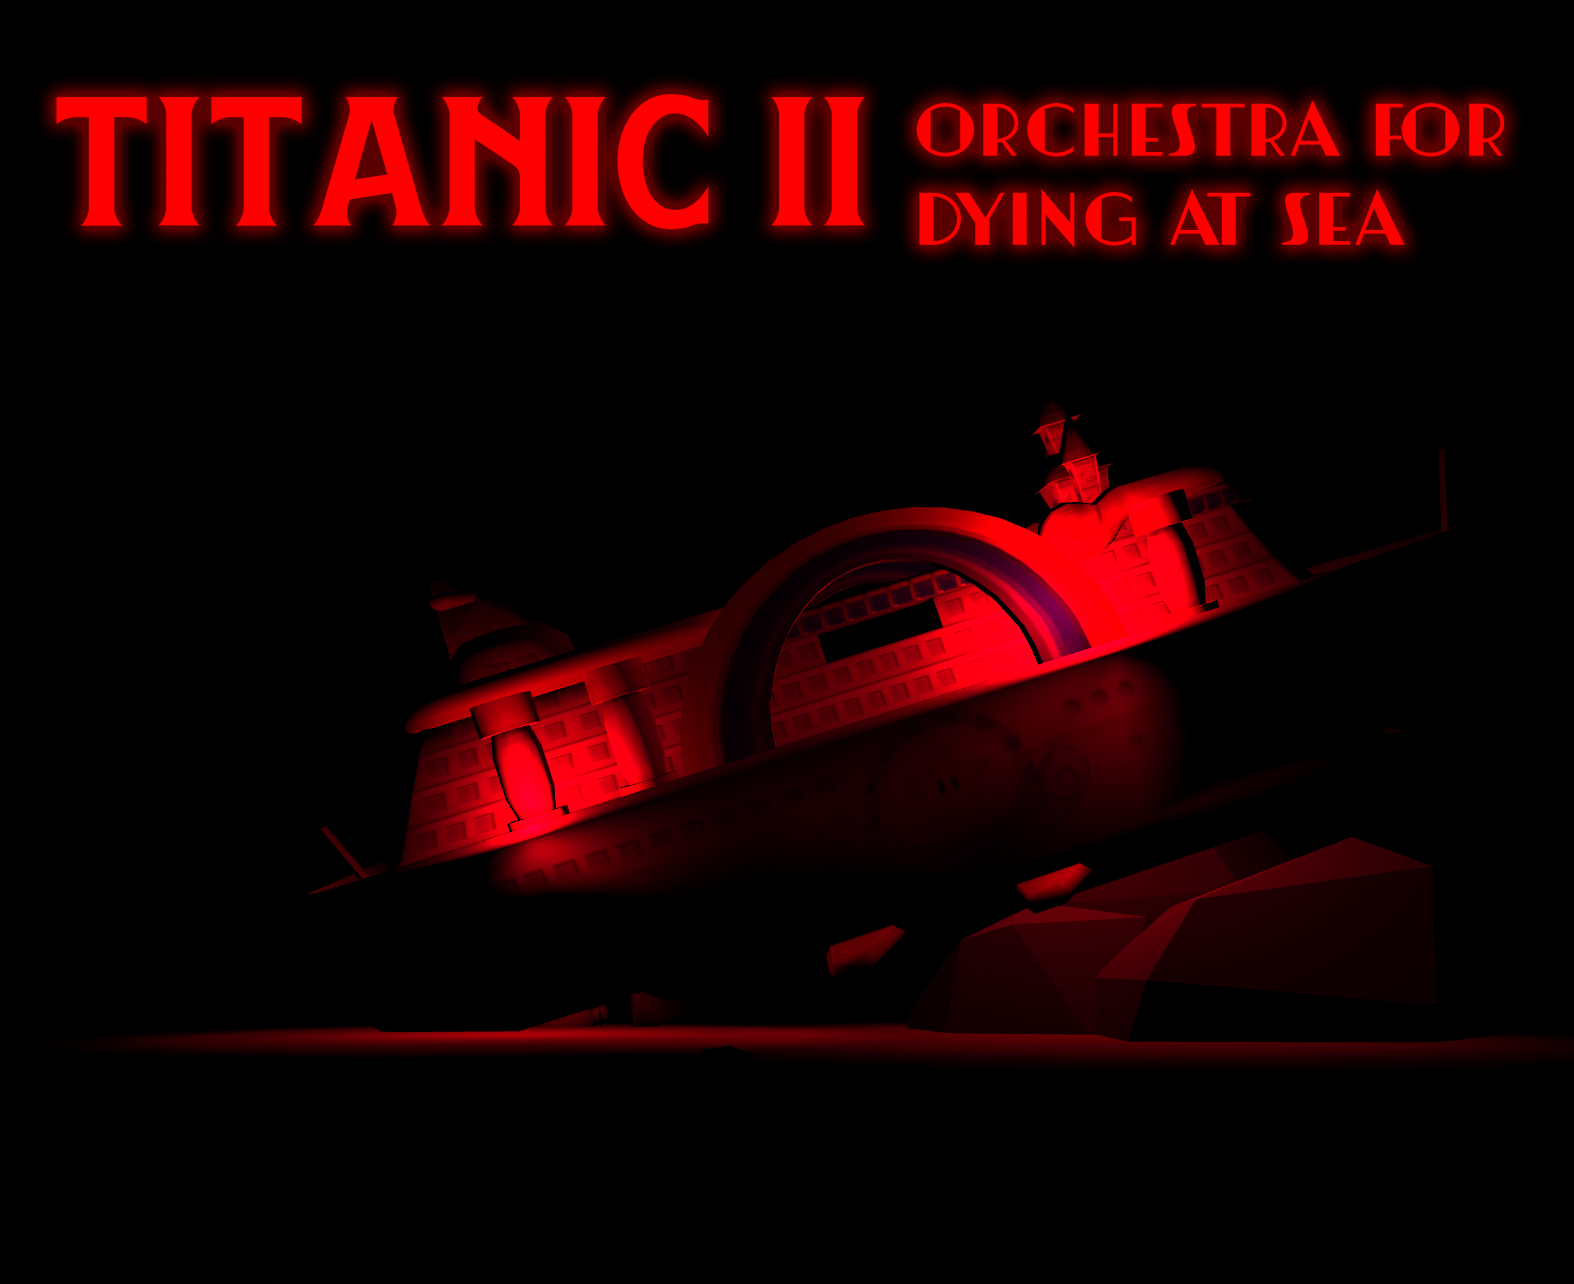 A rectangular promotional image for Titanic 2: Orchestra for Dying at Sea, it features the title in a glowing red font. Centered in the image is a digital rendering of a large cruise ship that is laying at the bottom of the ocean and is lit by emergency red lights.